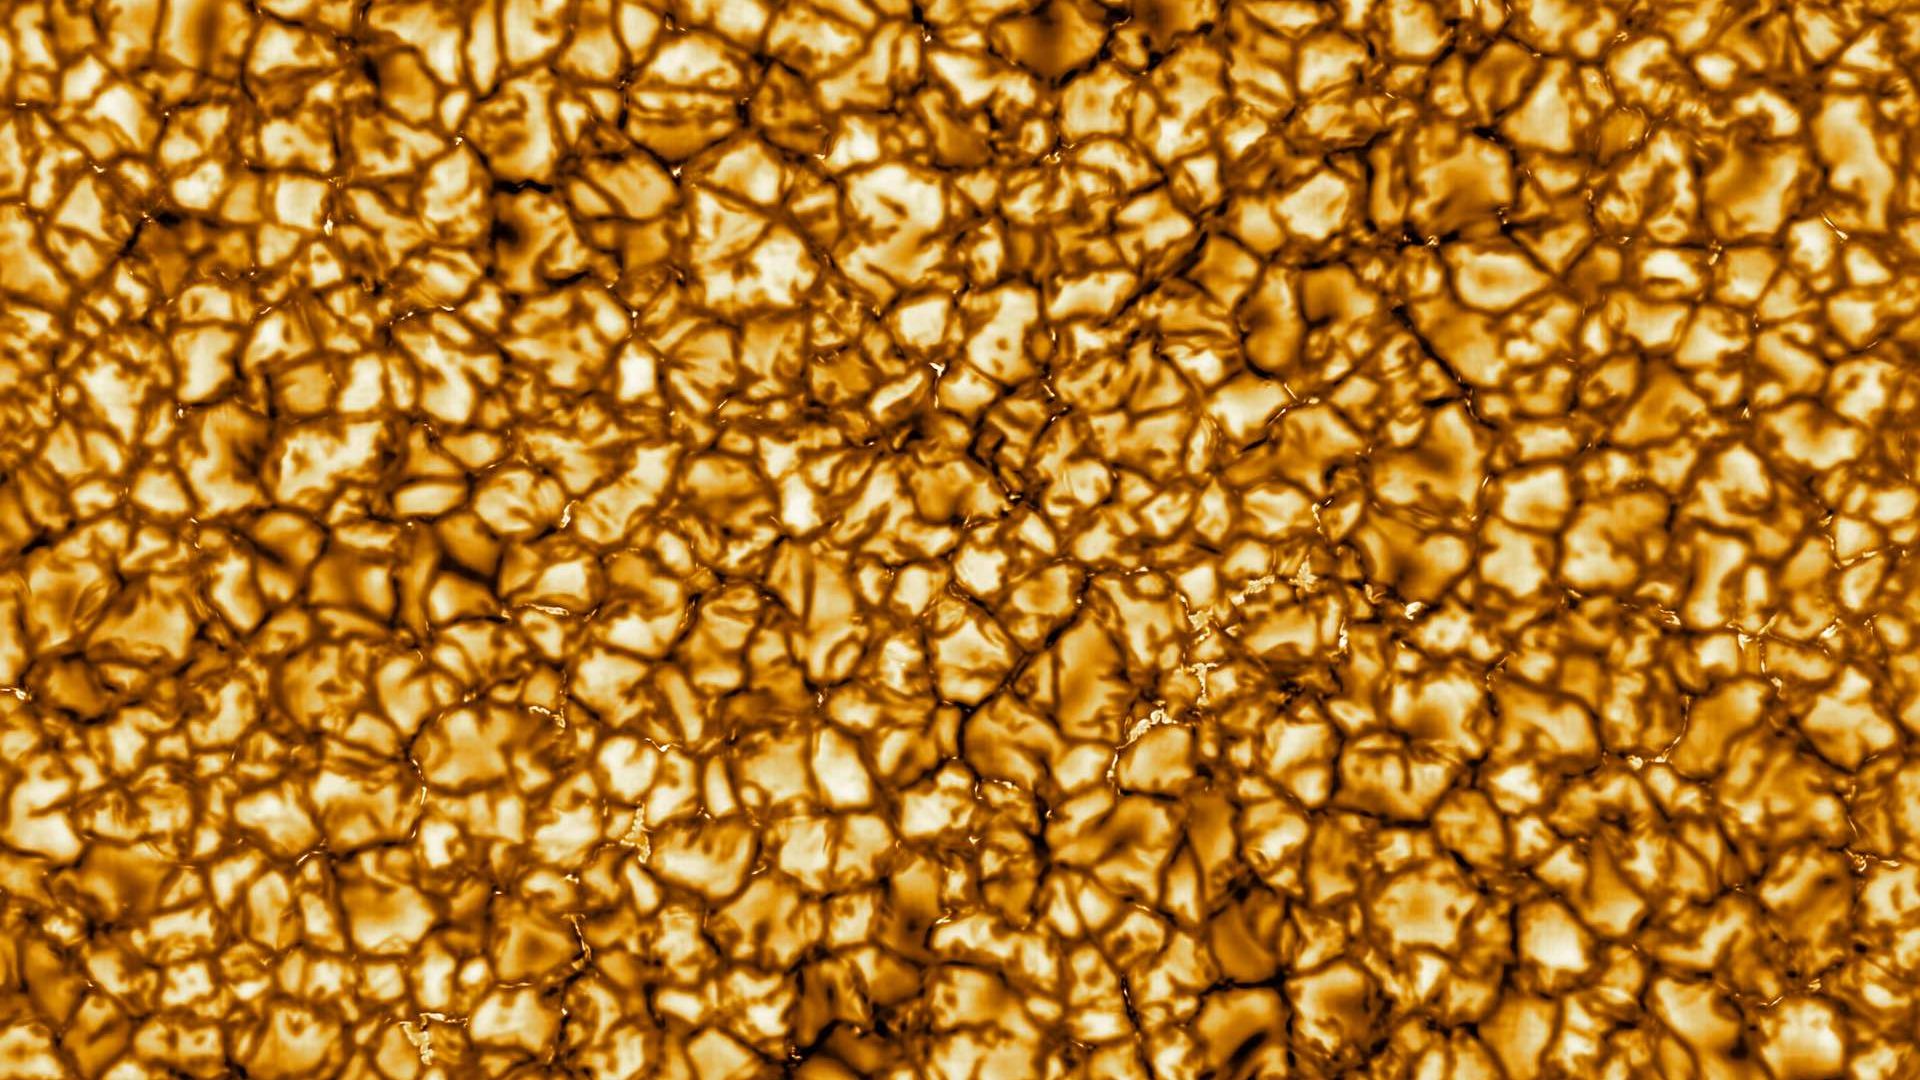 The sun's surface in high-resolution in yellow and orange